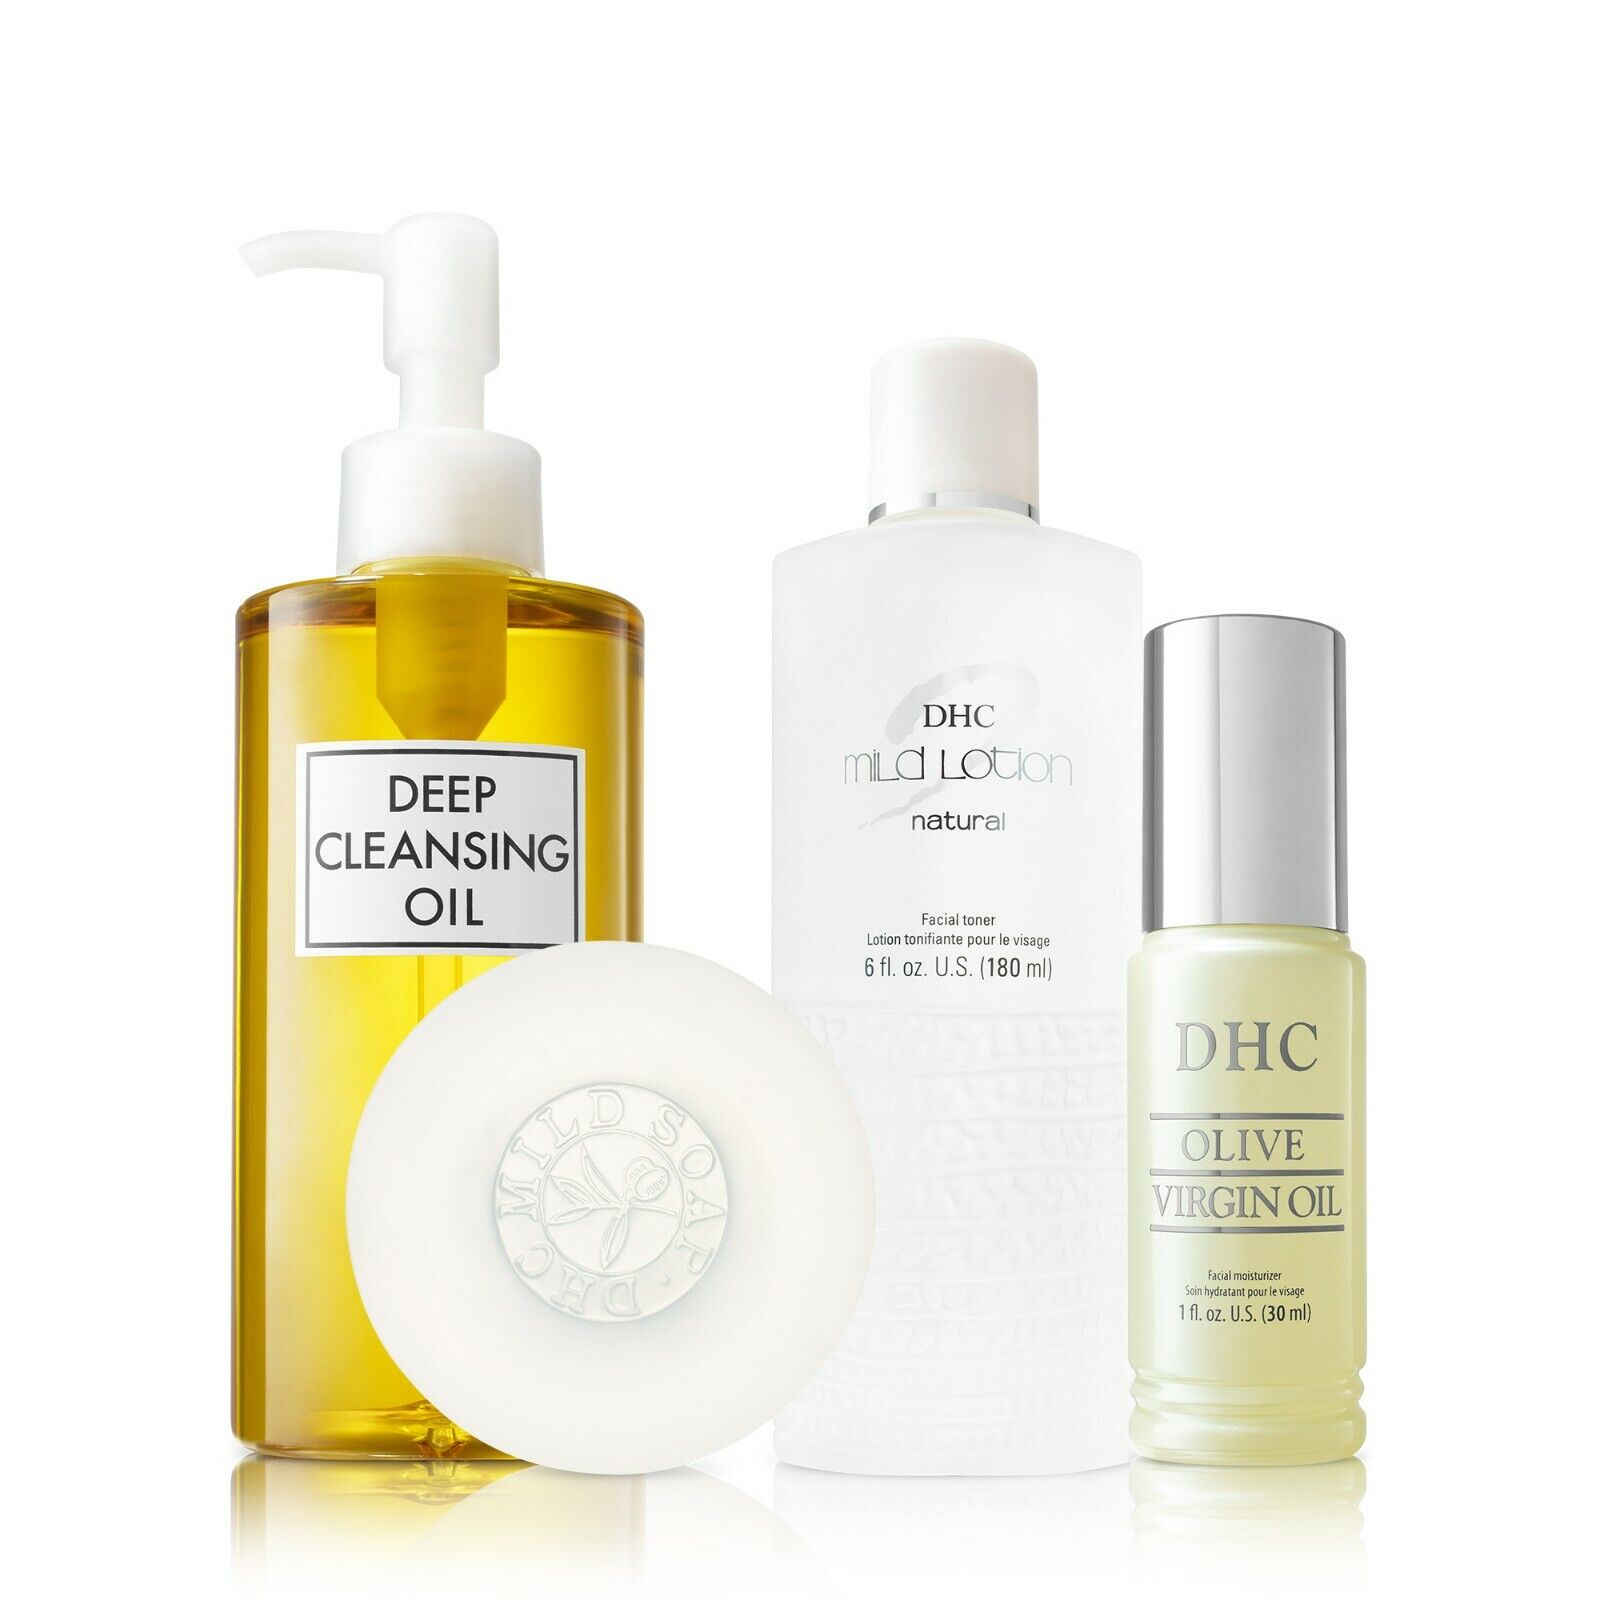 DHC Olive Essentials Set, (OPEN BOX) includes four free samples